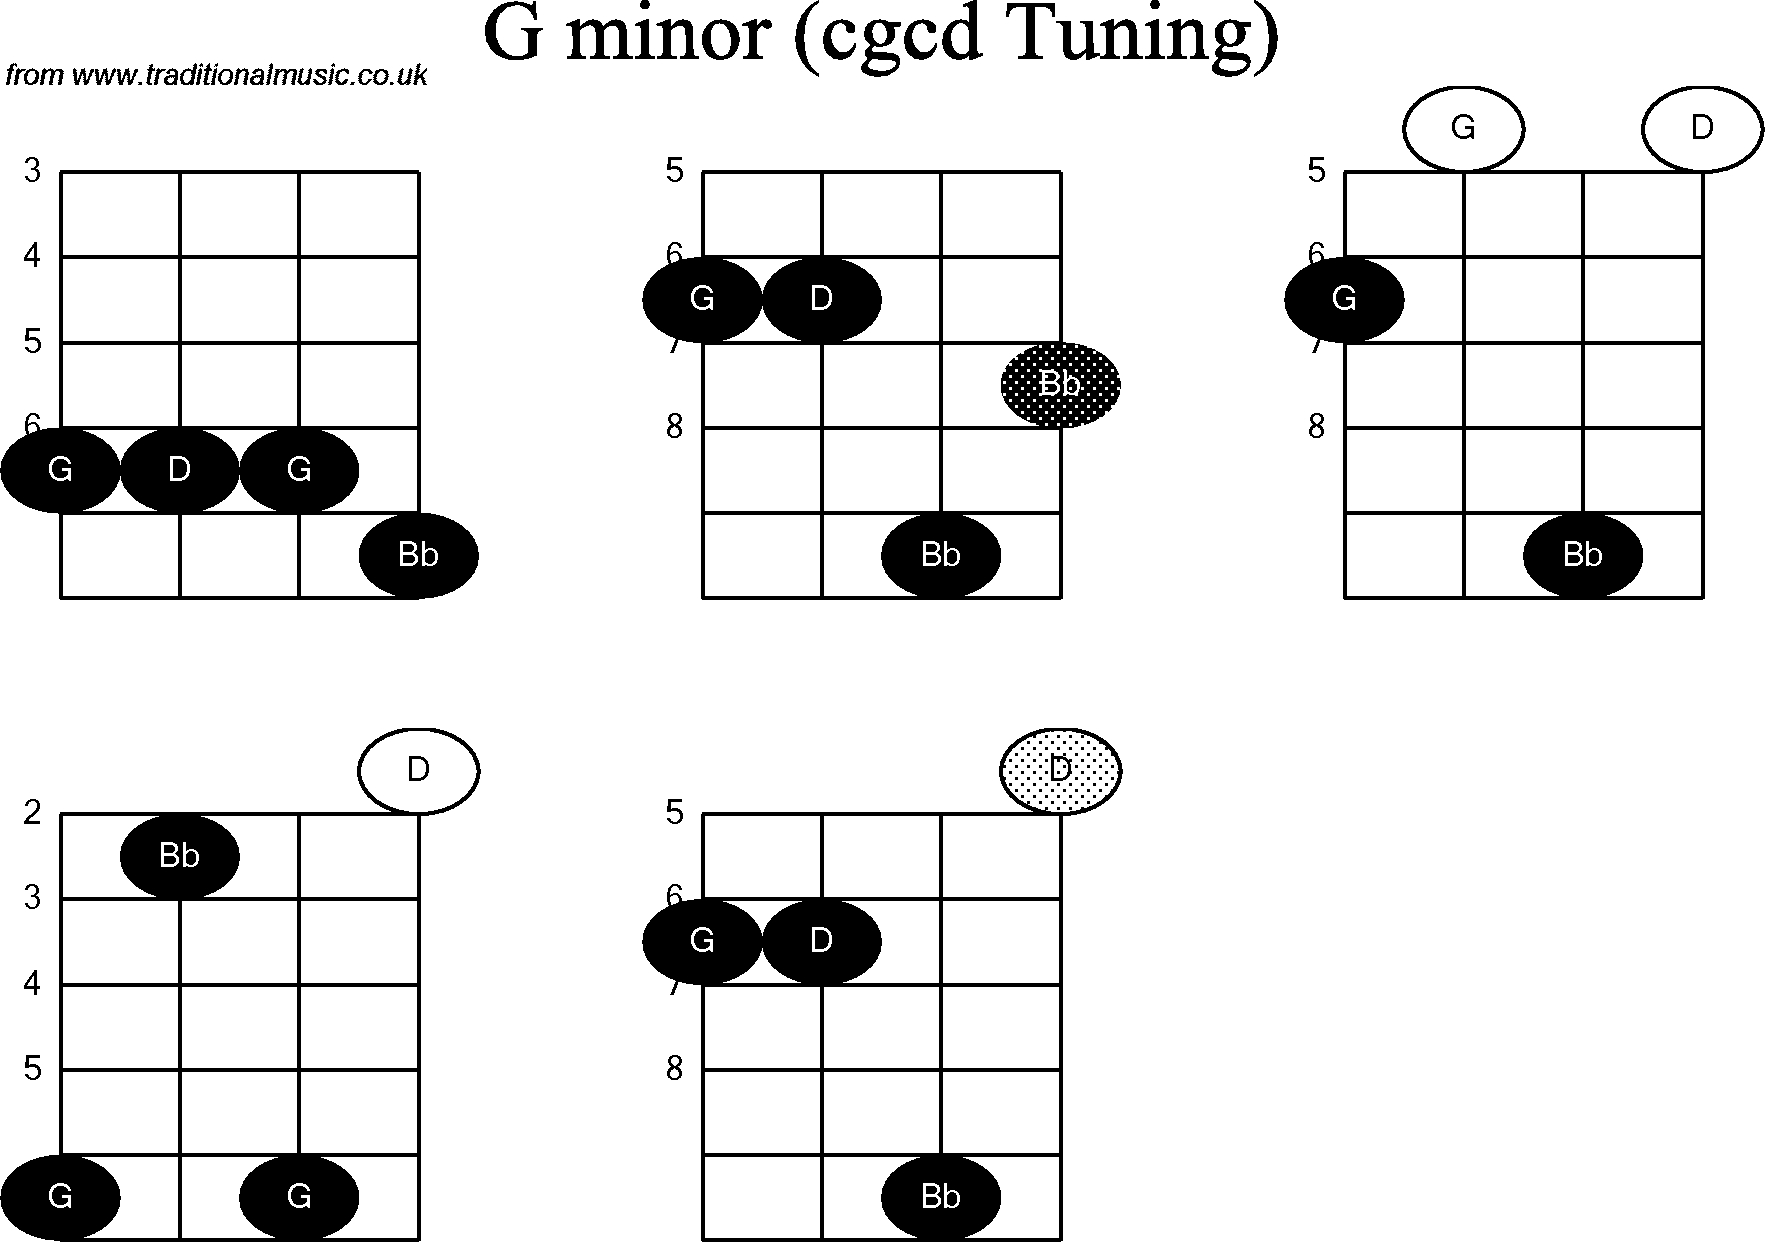 Chord diagrams for Banjo(Double C) G Minor